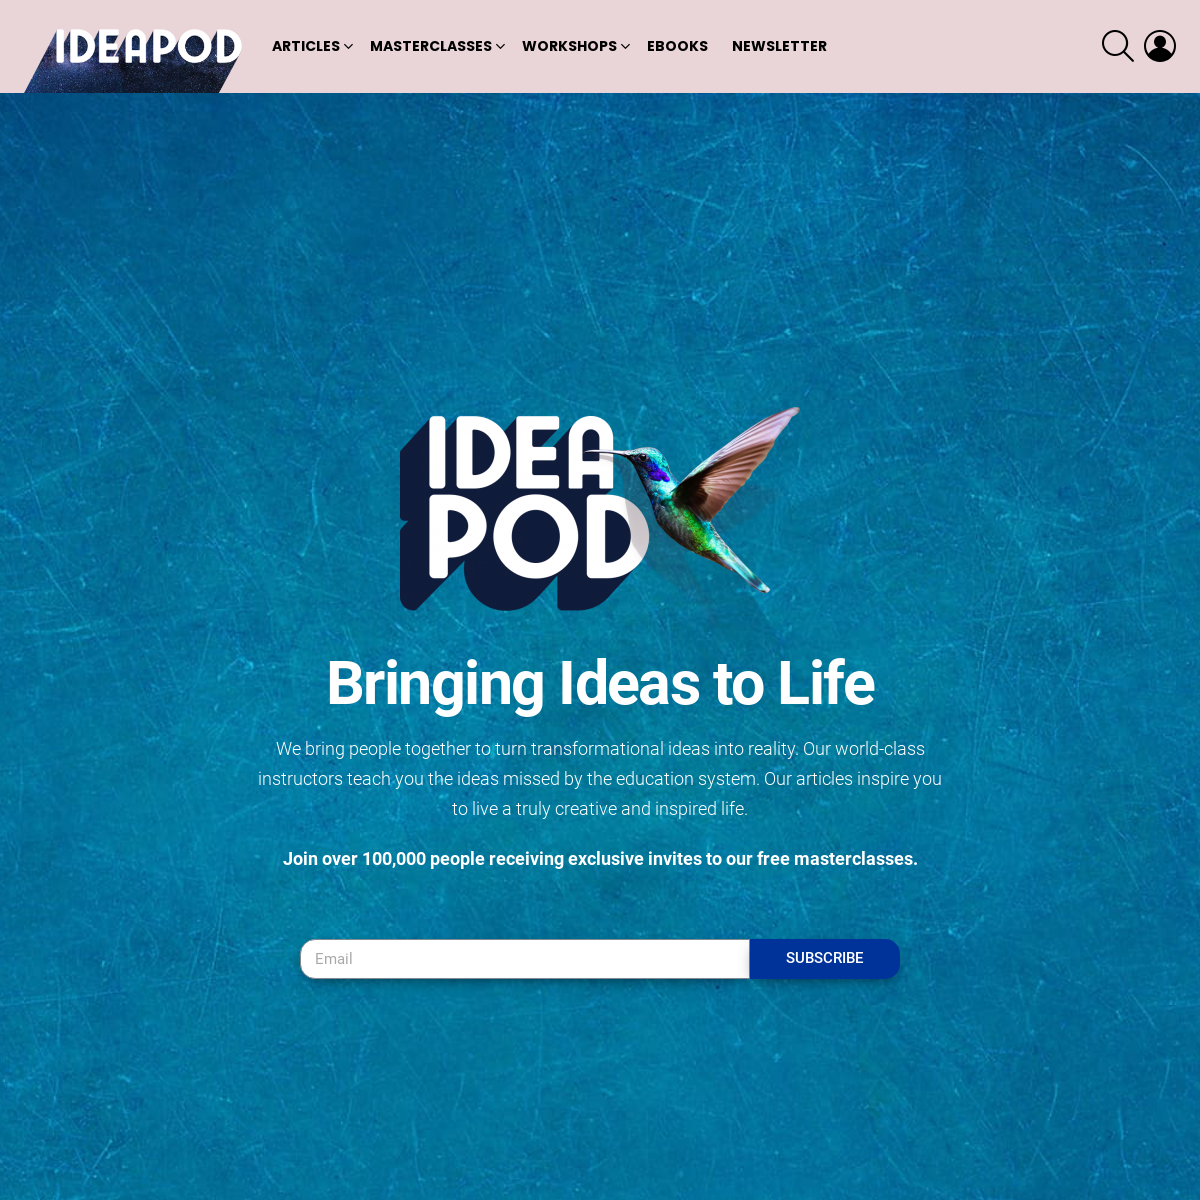 A complete backup of ideapod.com